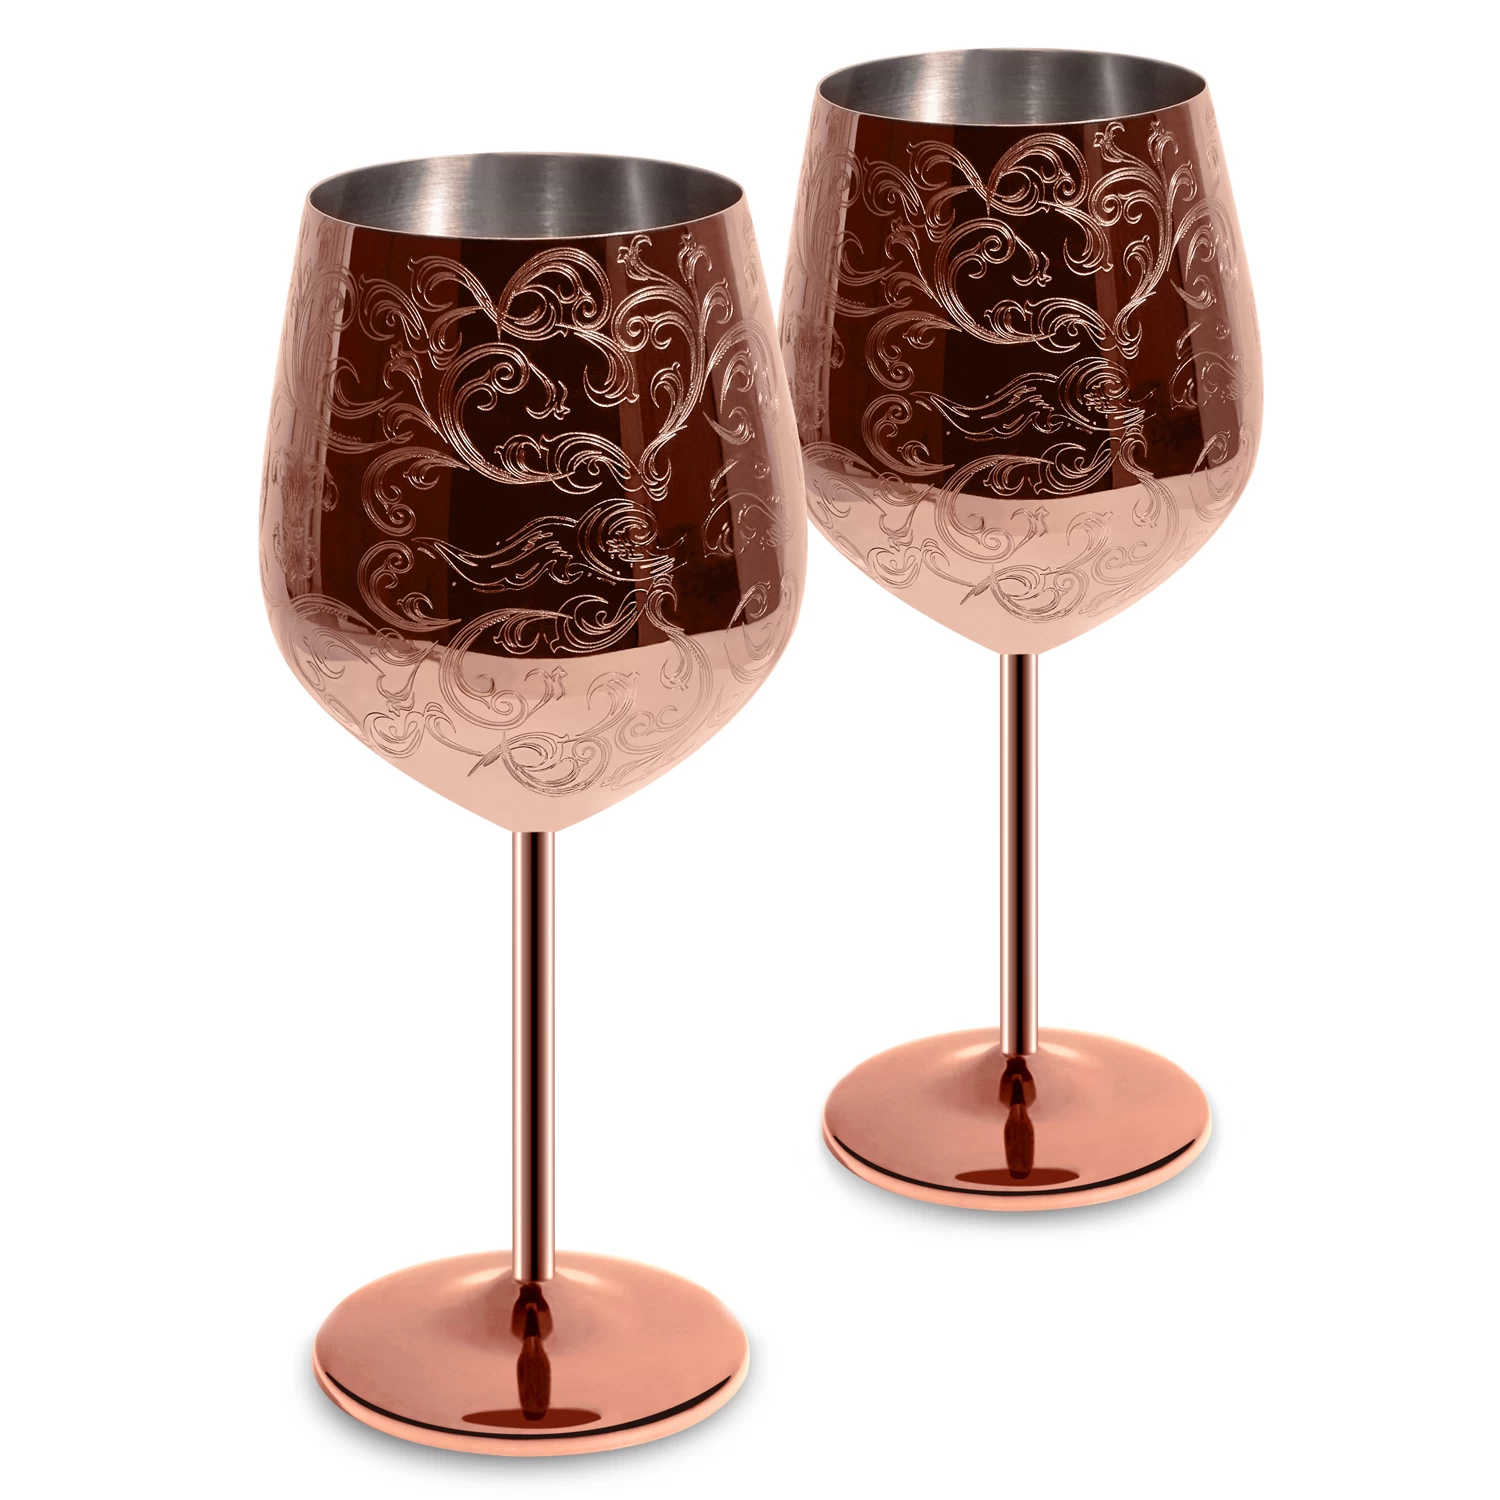 Stainless Steel Copper Plated Royal Style Wine Goblets